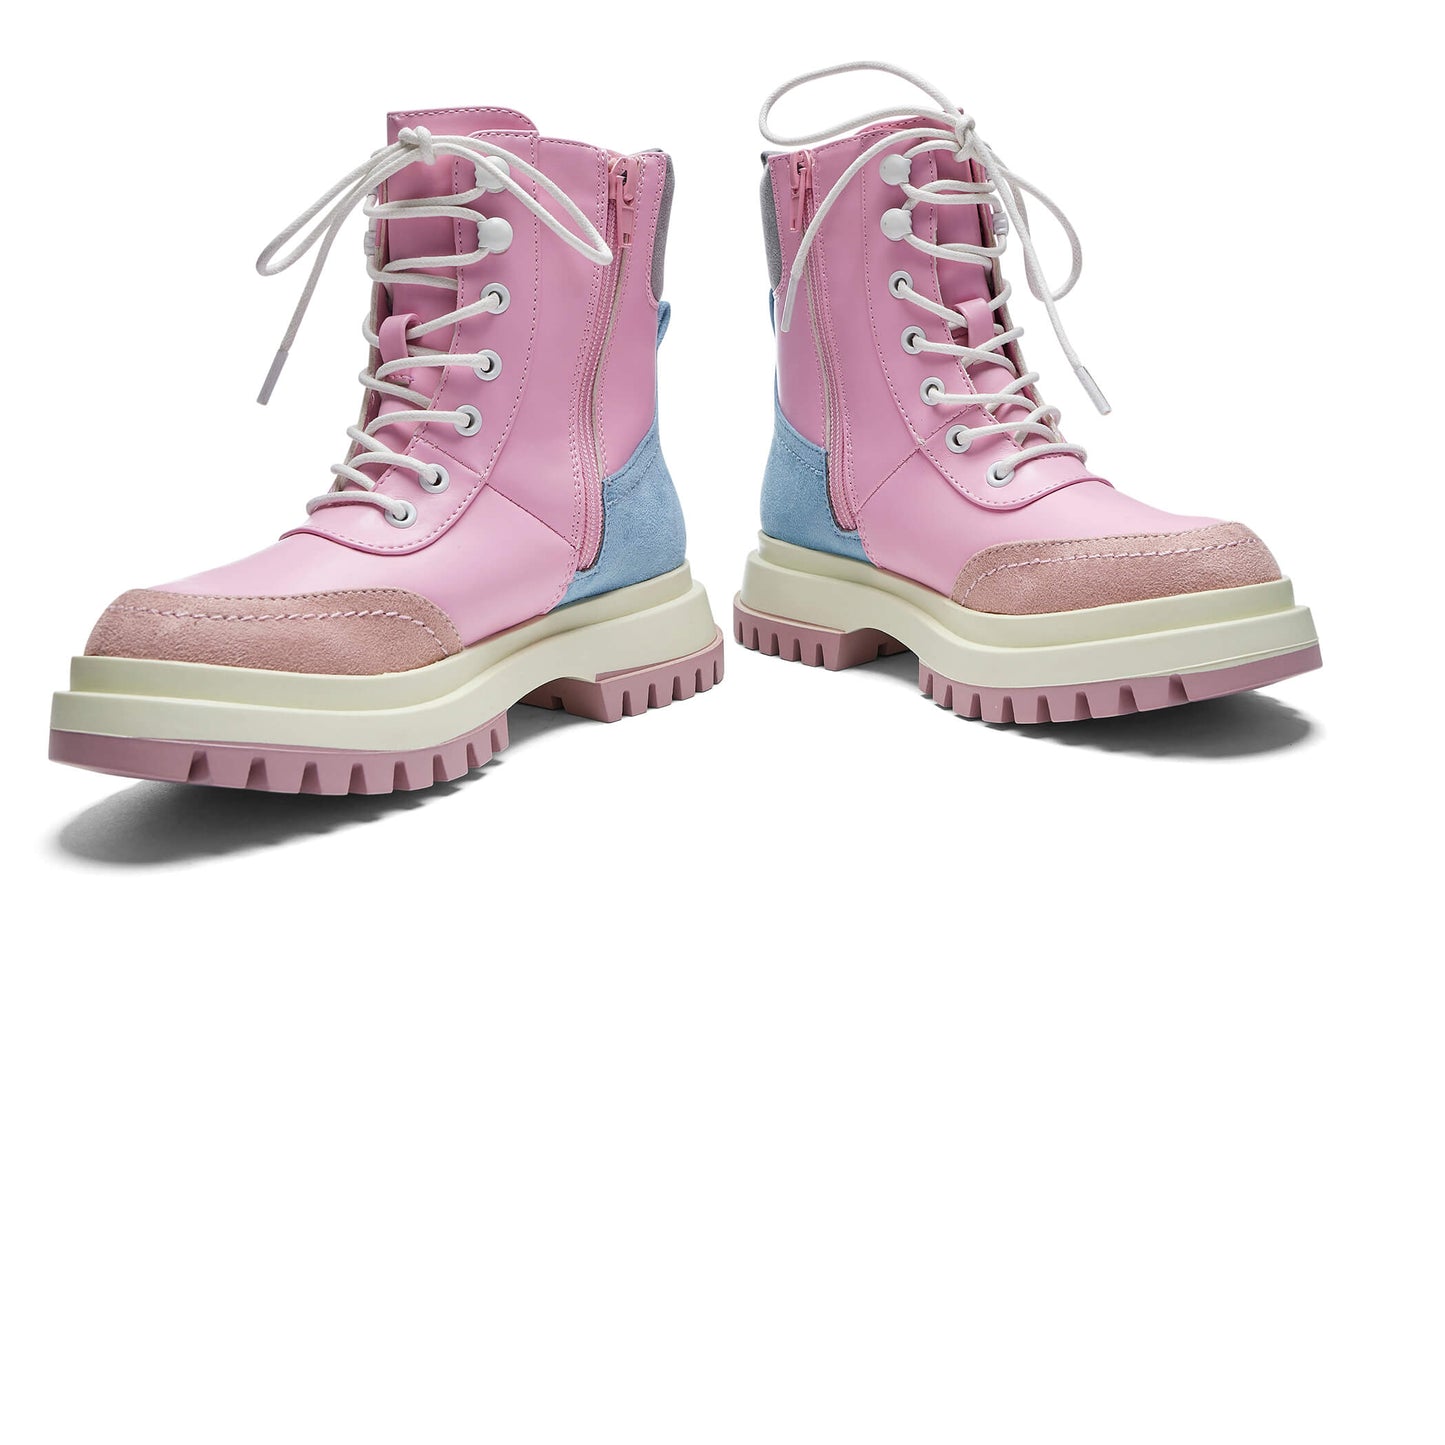 Lil’ Hydra Kawaii Boots - Ankle Boots - KOI Footwear - Pink - Front Detail